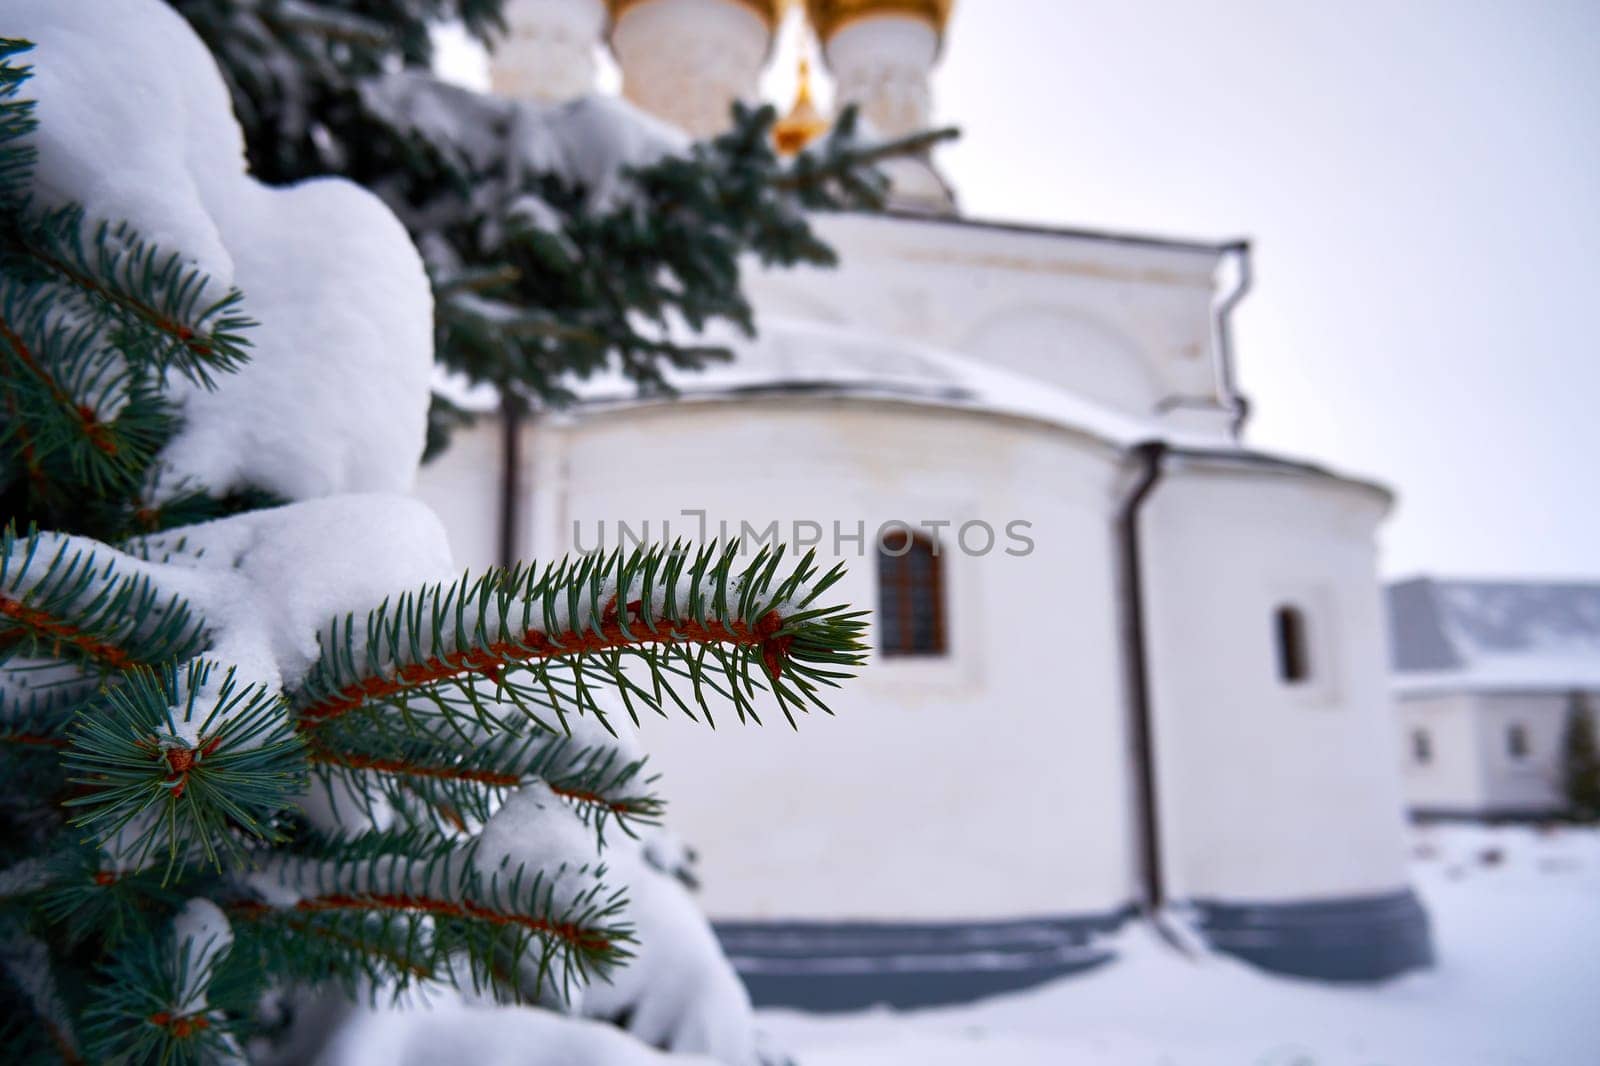 Fir branches covered with snow against the background of a white Orthodox church